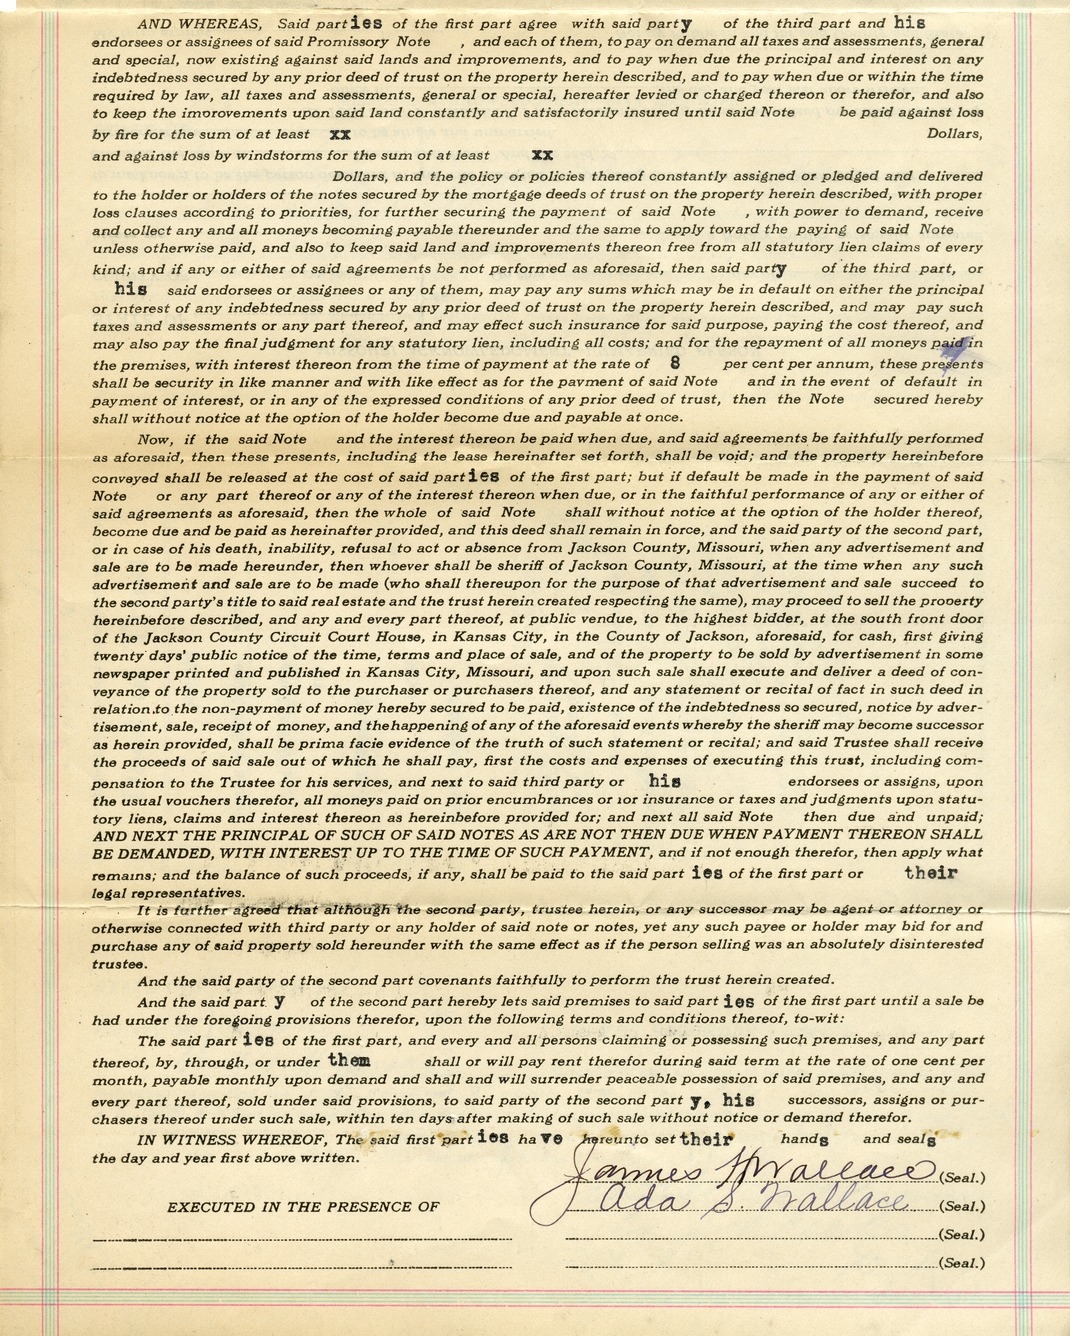 Deed of Trust from James H. Wallace and Ada S. Wallace to L. N. Manley for Mark Carhart